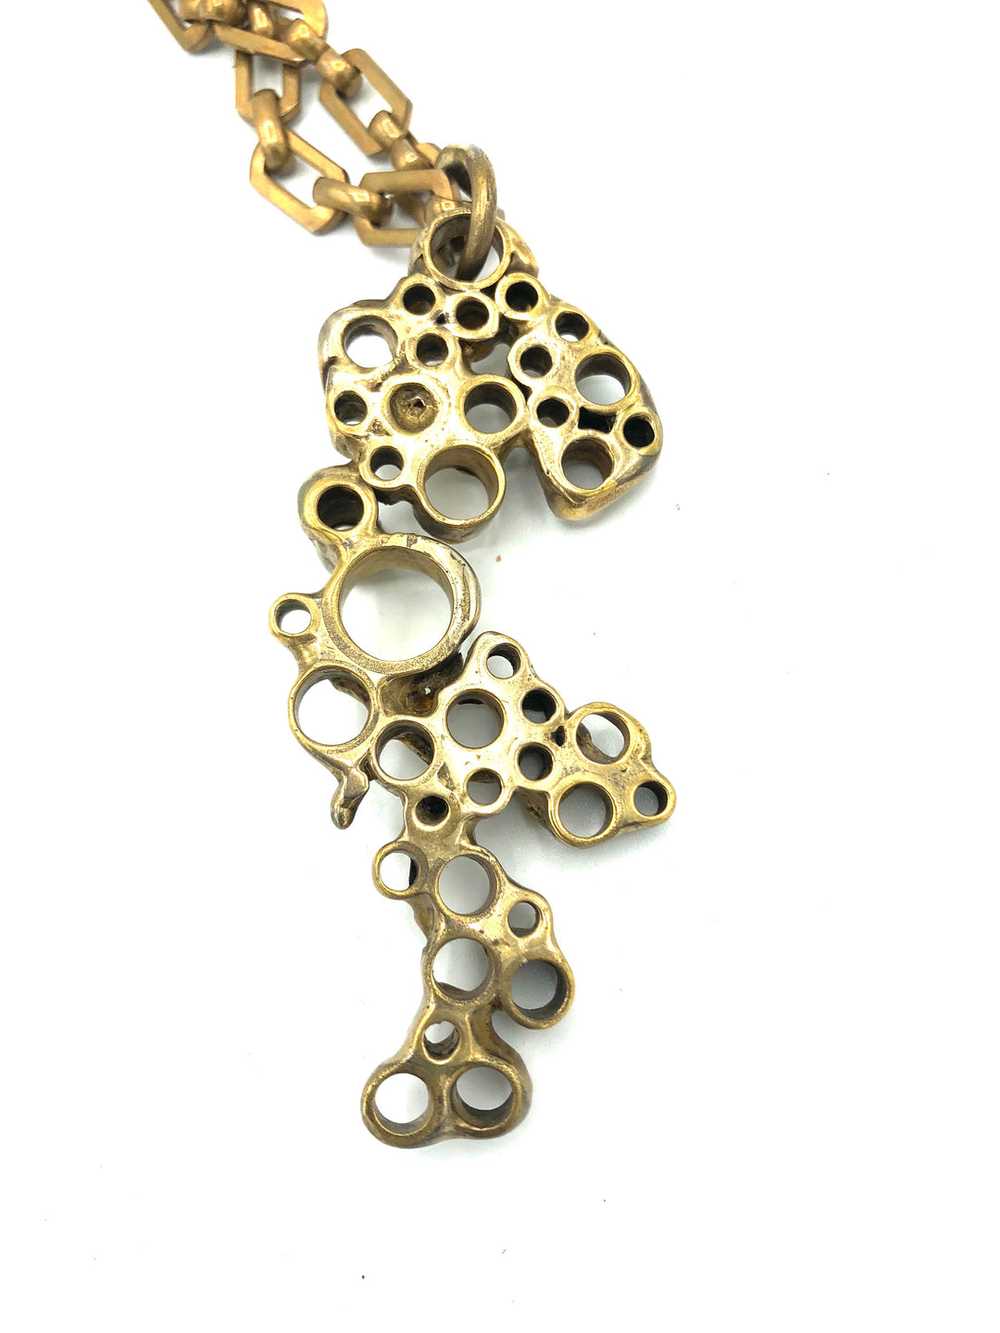 1960s/70s Brutalist Bronze and Brass Necklace - image 3